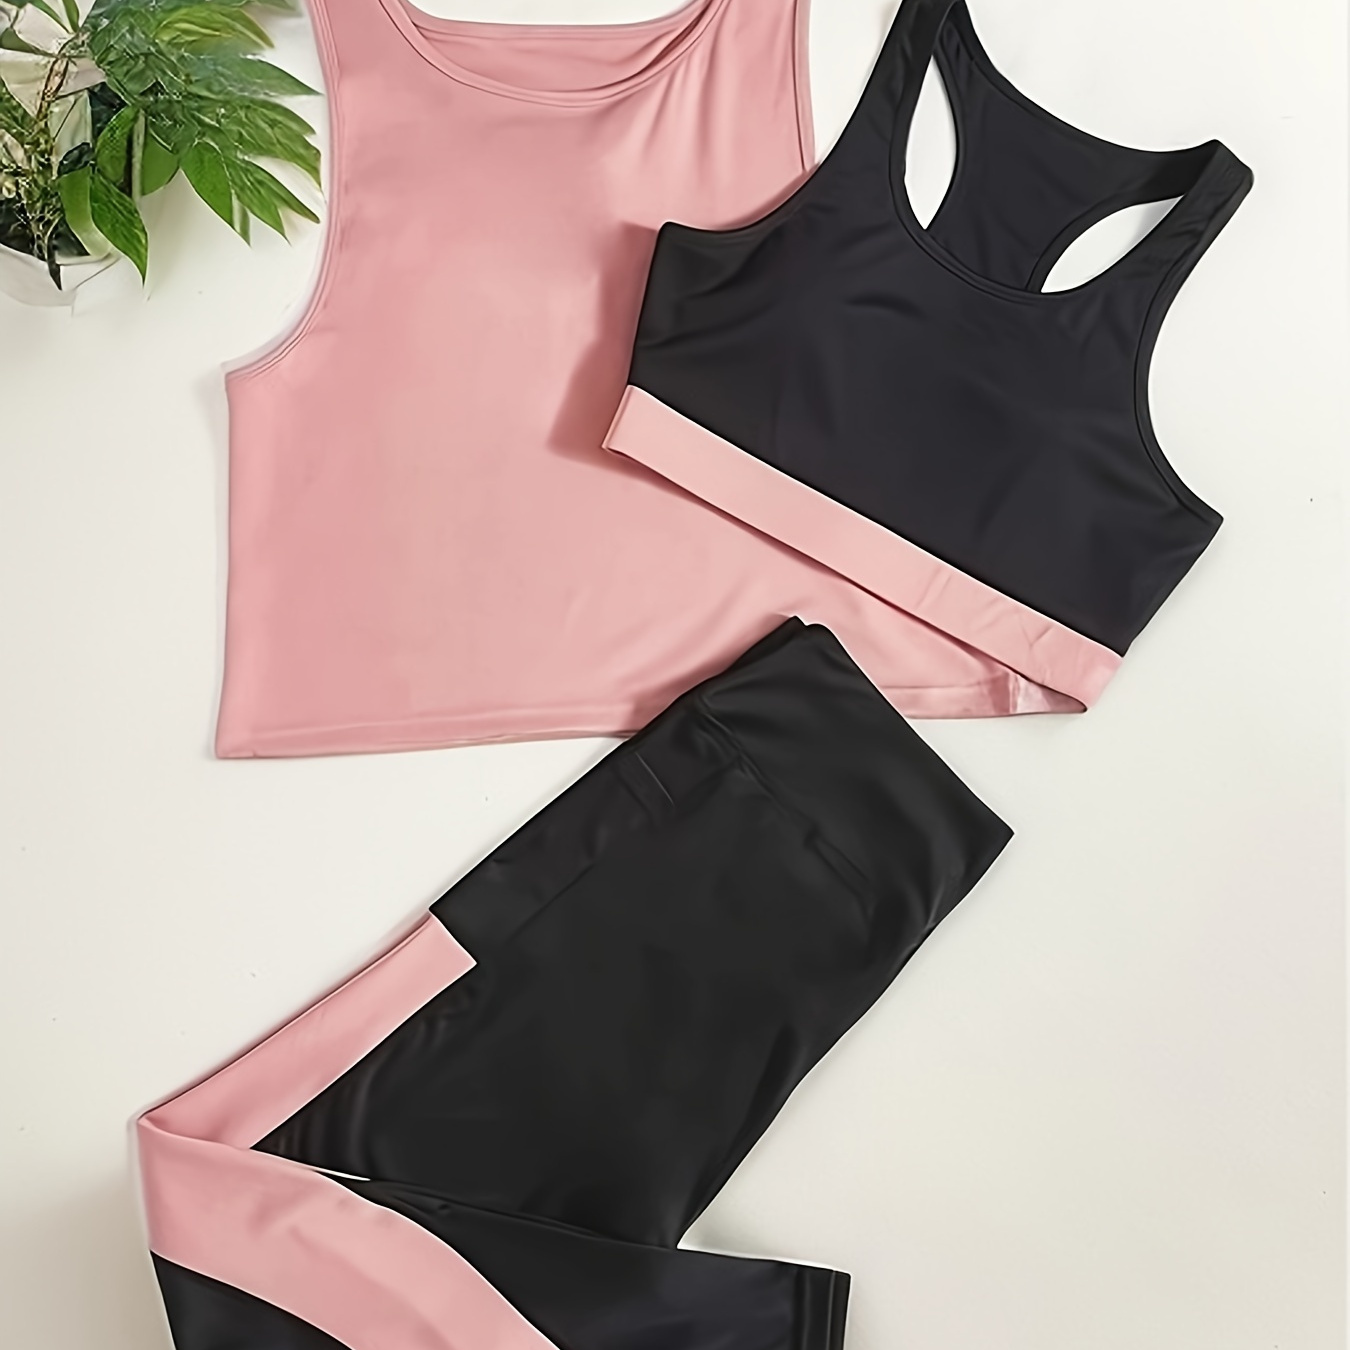 

Women's Yoga Set, Color Block Sports Fitness Bra & Tank Top With Leggings And Tank Top, Athletic Activewear, Gym Workout Gear Stretchable, Comfort-fit